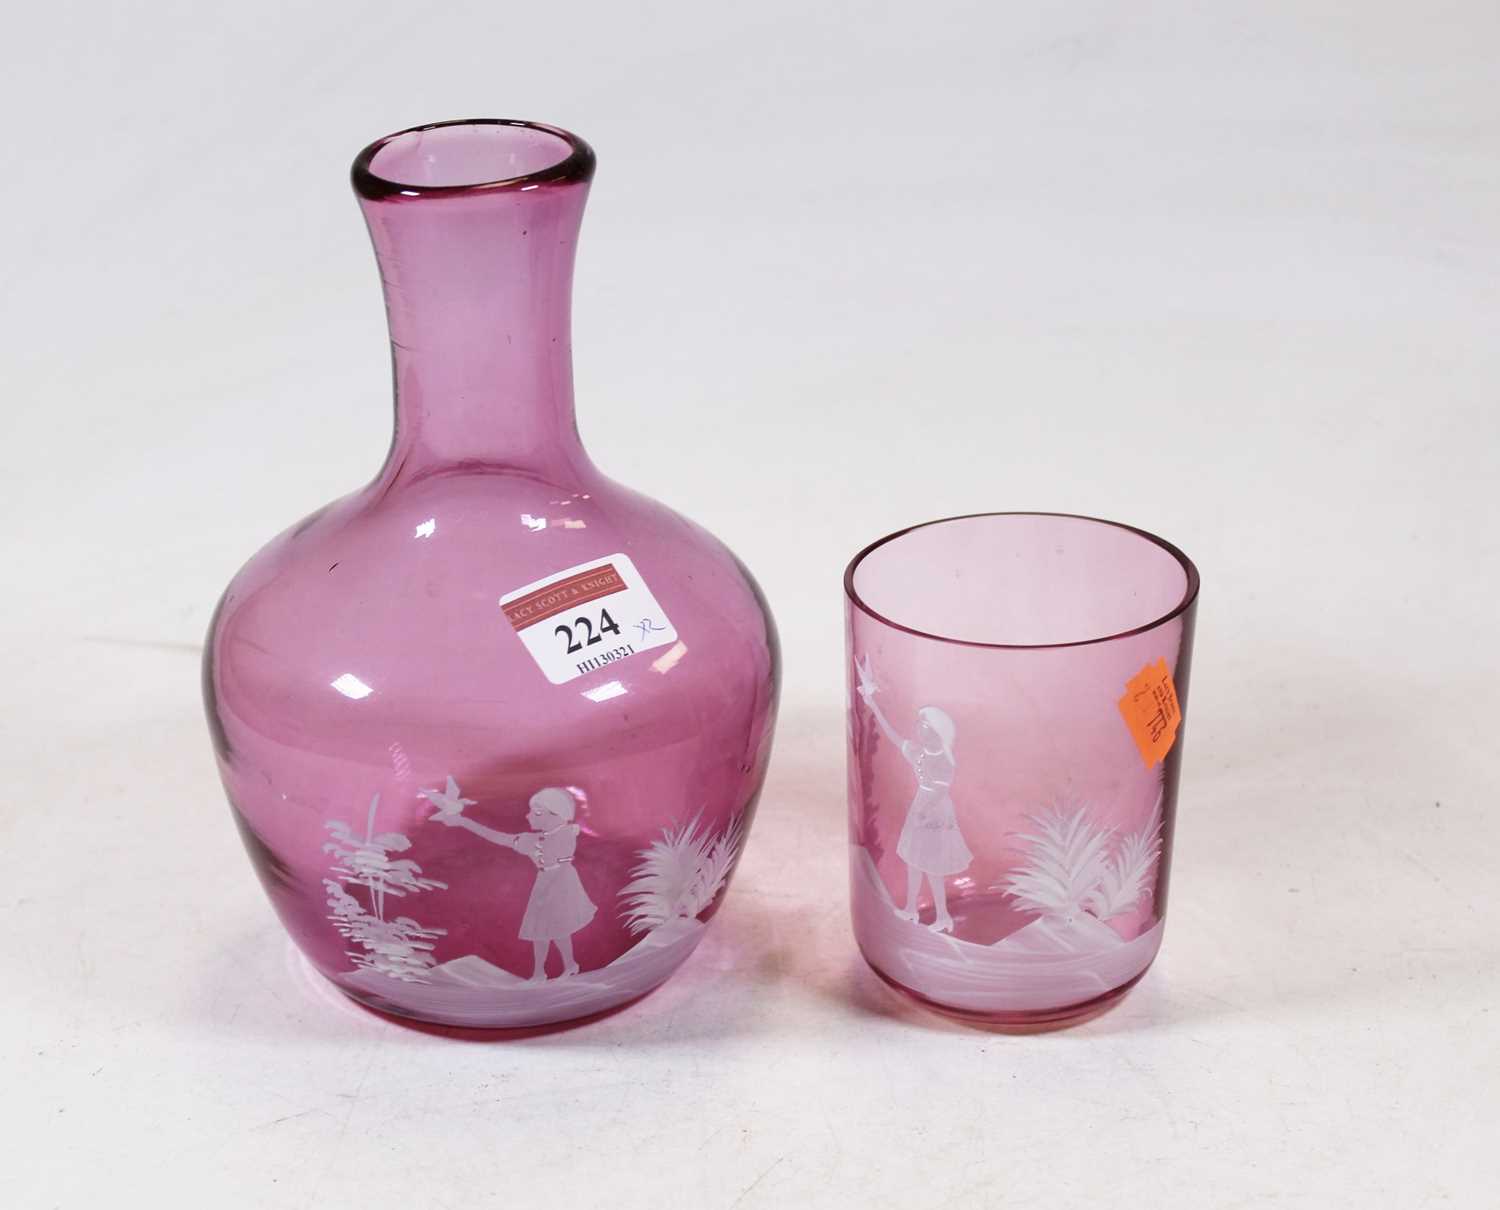 An amethyst tinted glass carafe with Mary Gregory style decoration in the form of a girl with bird